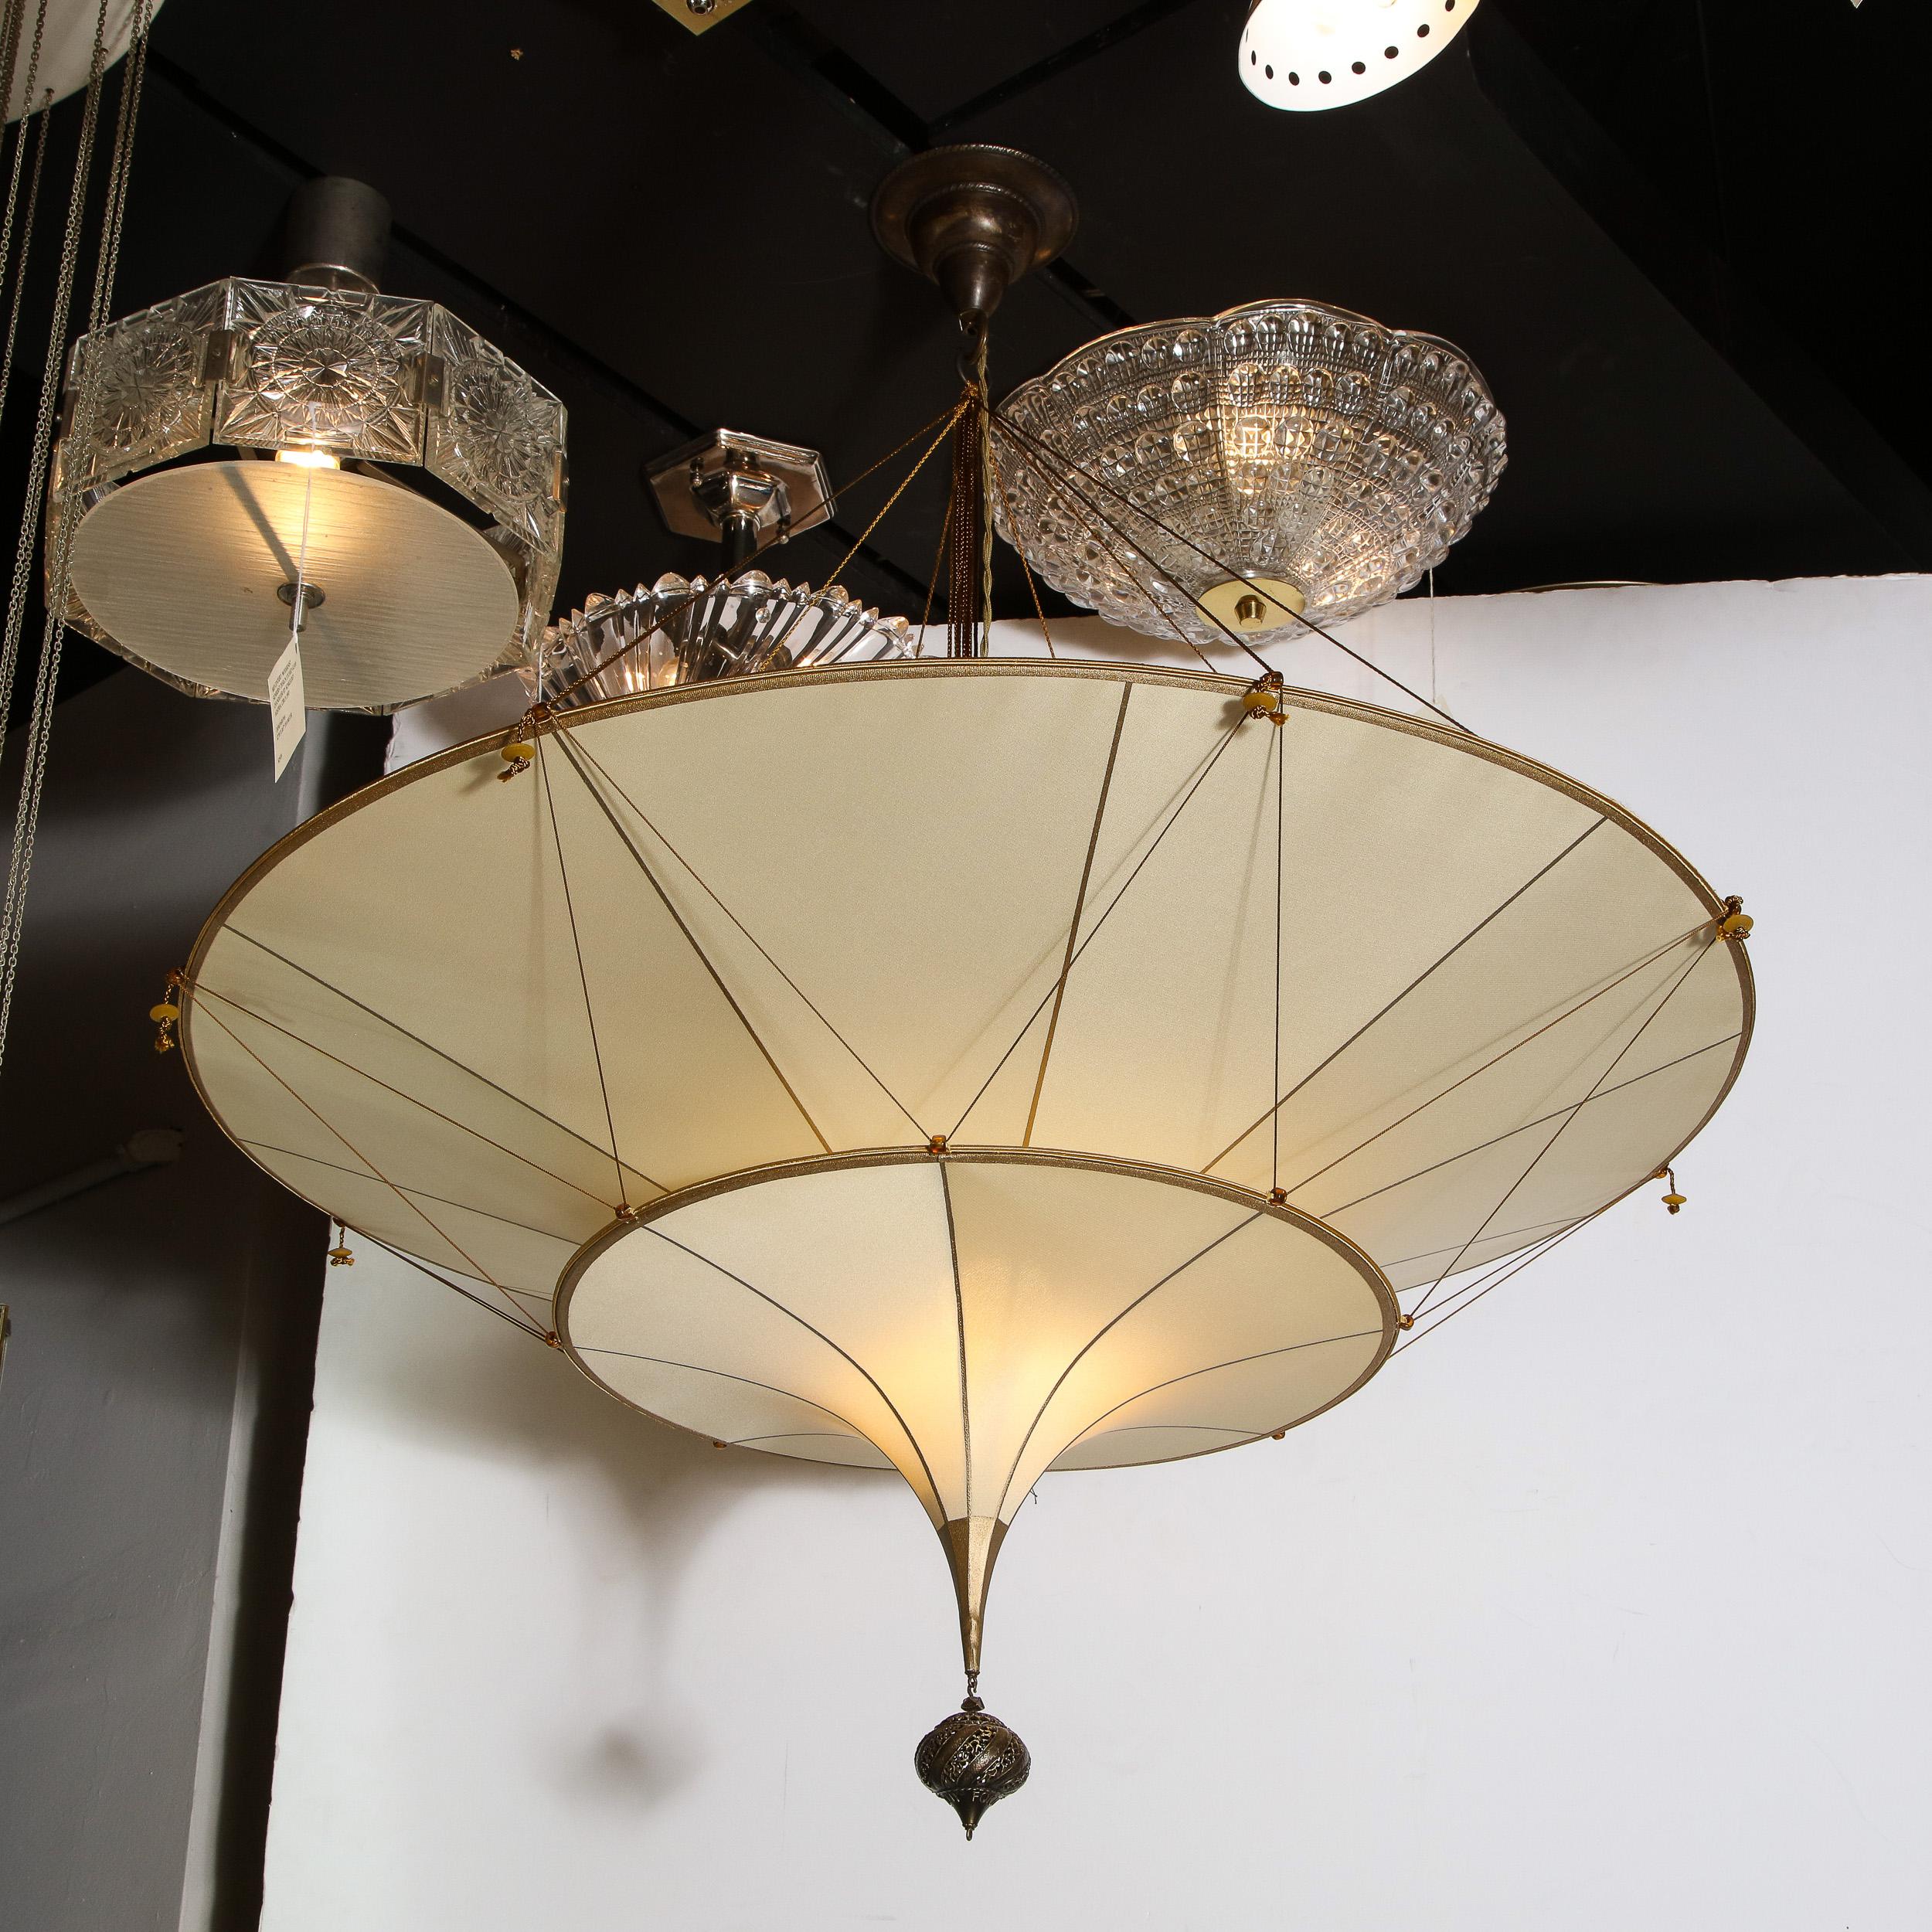 This elegant Mid-Century Modern Scheherazade chandelier was realized by Mariano Fortuny in Italy. It offers two convex tiers of beige silk with an oil rubbed bronze tapered cylindrical finial that connects to a curved striated and textured tear drop